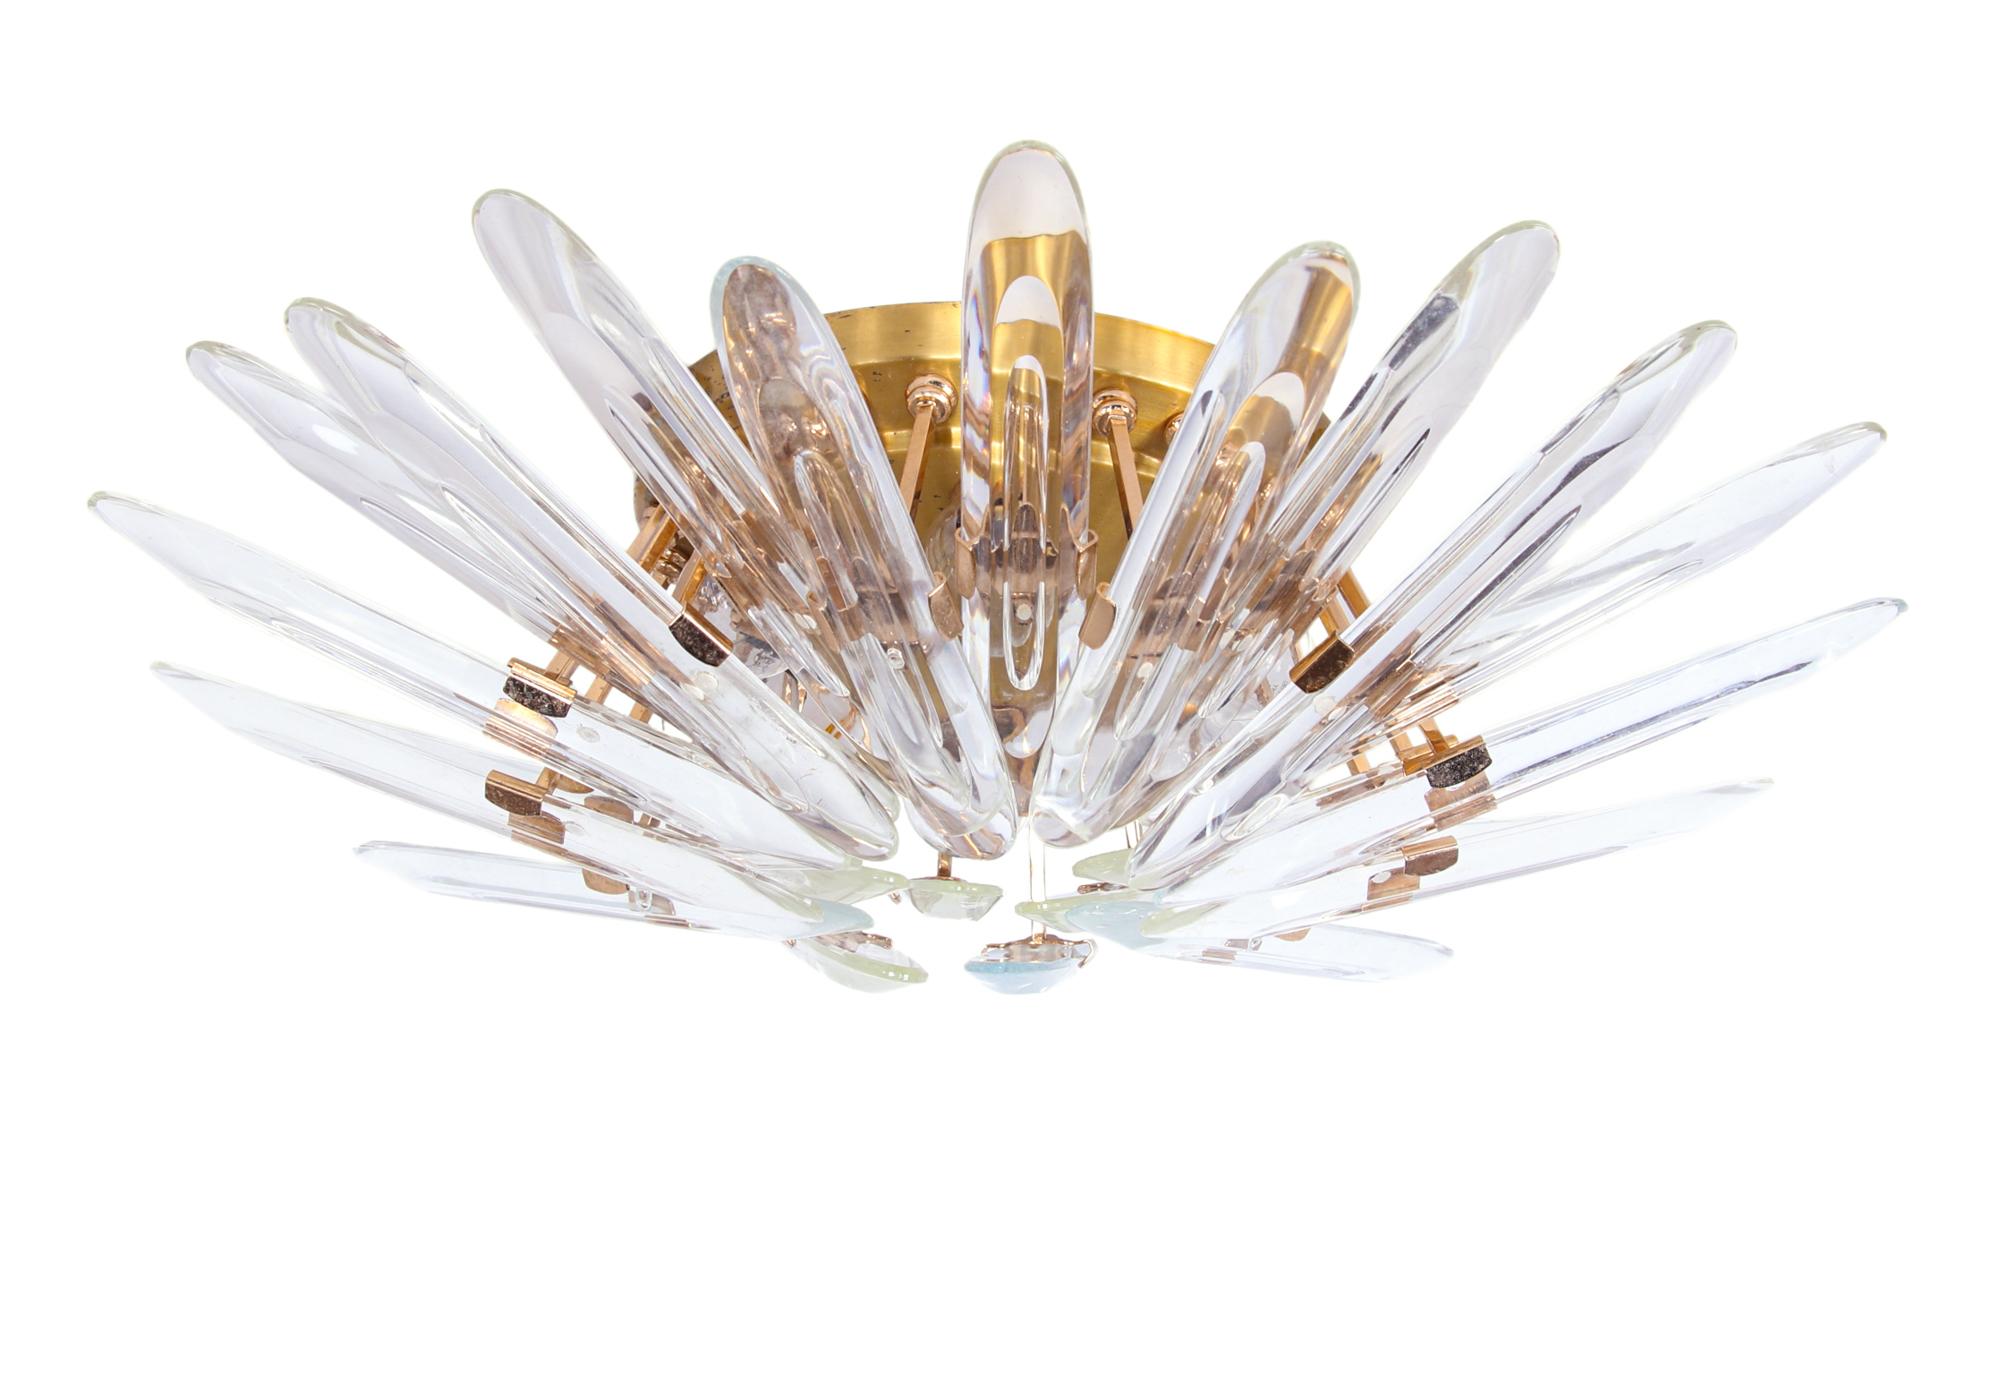 Elegant sunburst flush mount with 24 clear crystal glasses on a golden brass frame. Designed by Oscar Torlasco and manufactured by Stilkronen, Italy in the 1970s.

Manufacturer: Stilkronen.
Design: Oscar Torlasco.
Colours: clear and